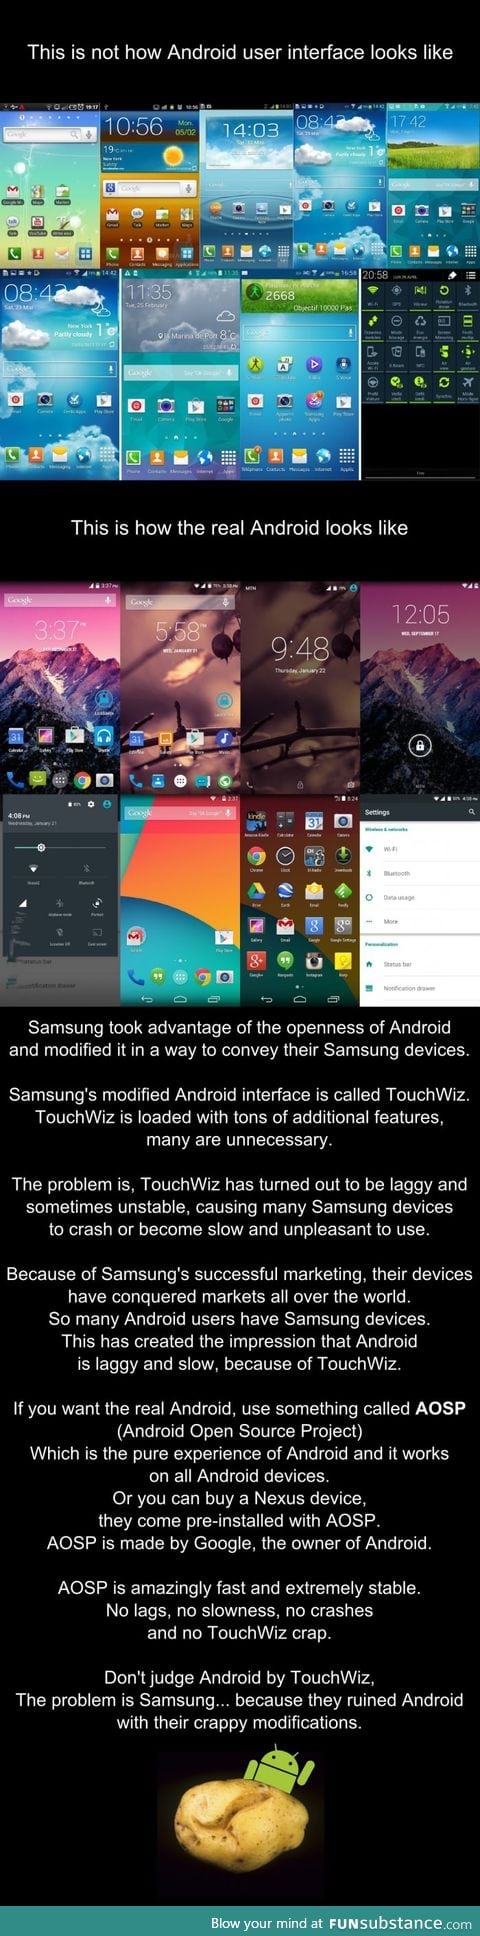 This has to be told about Android